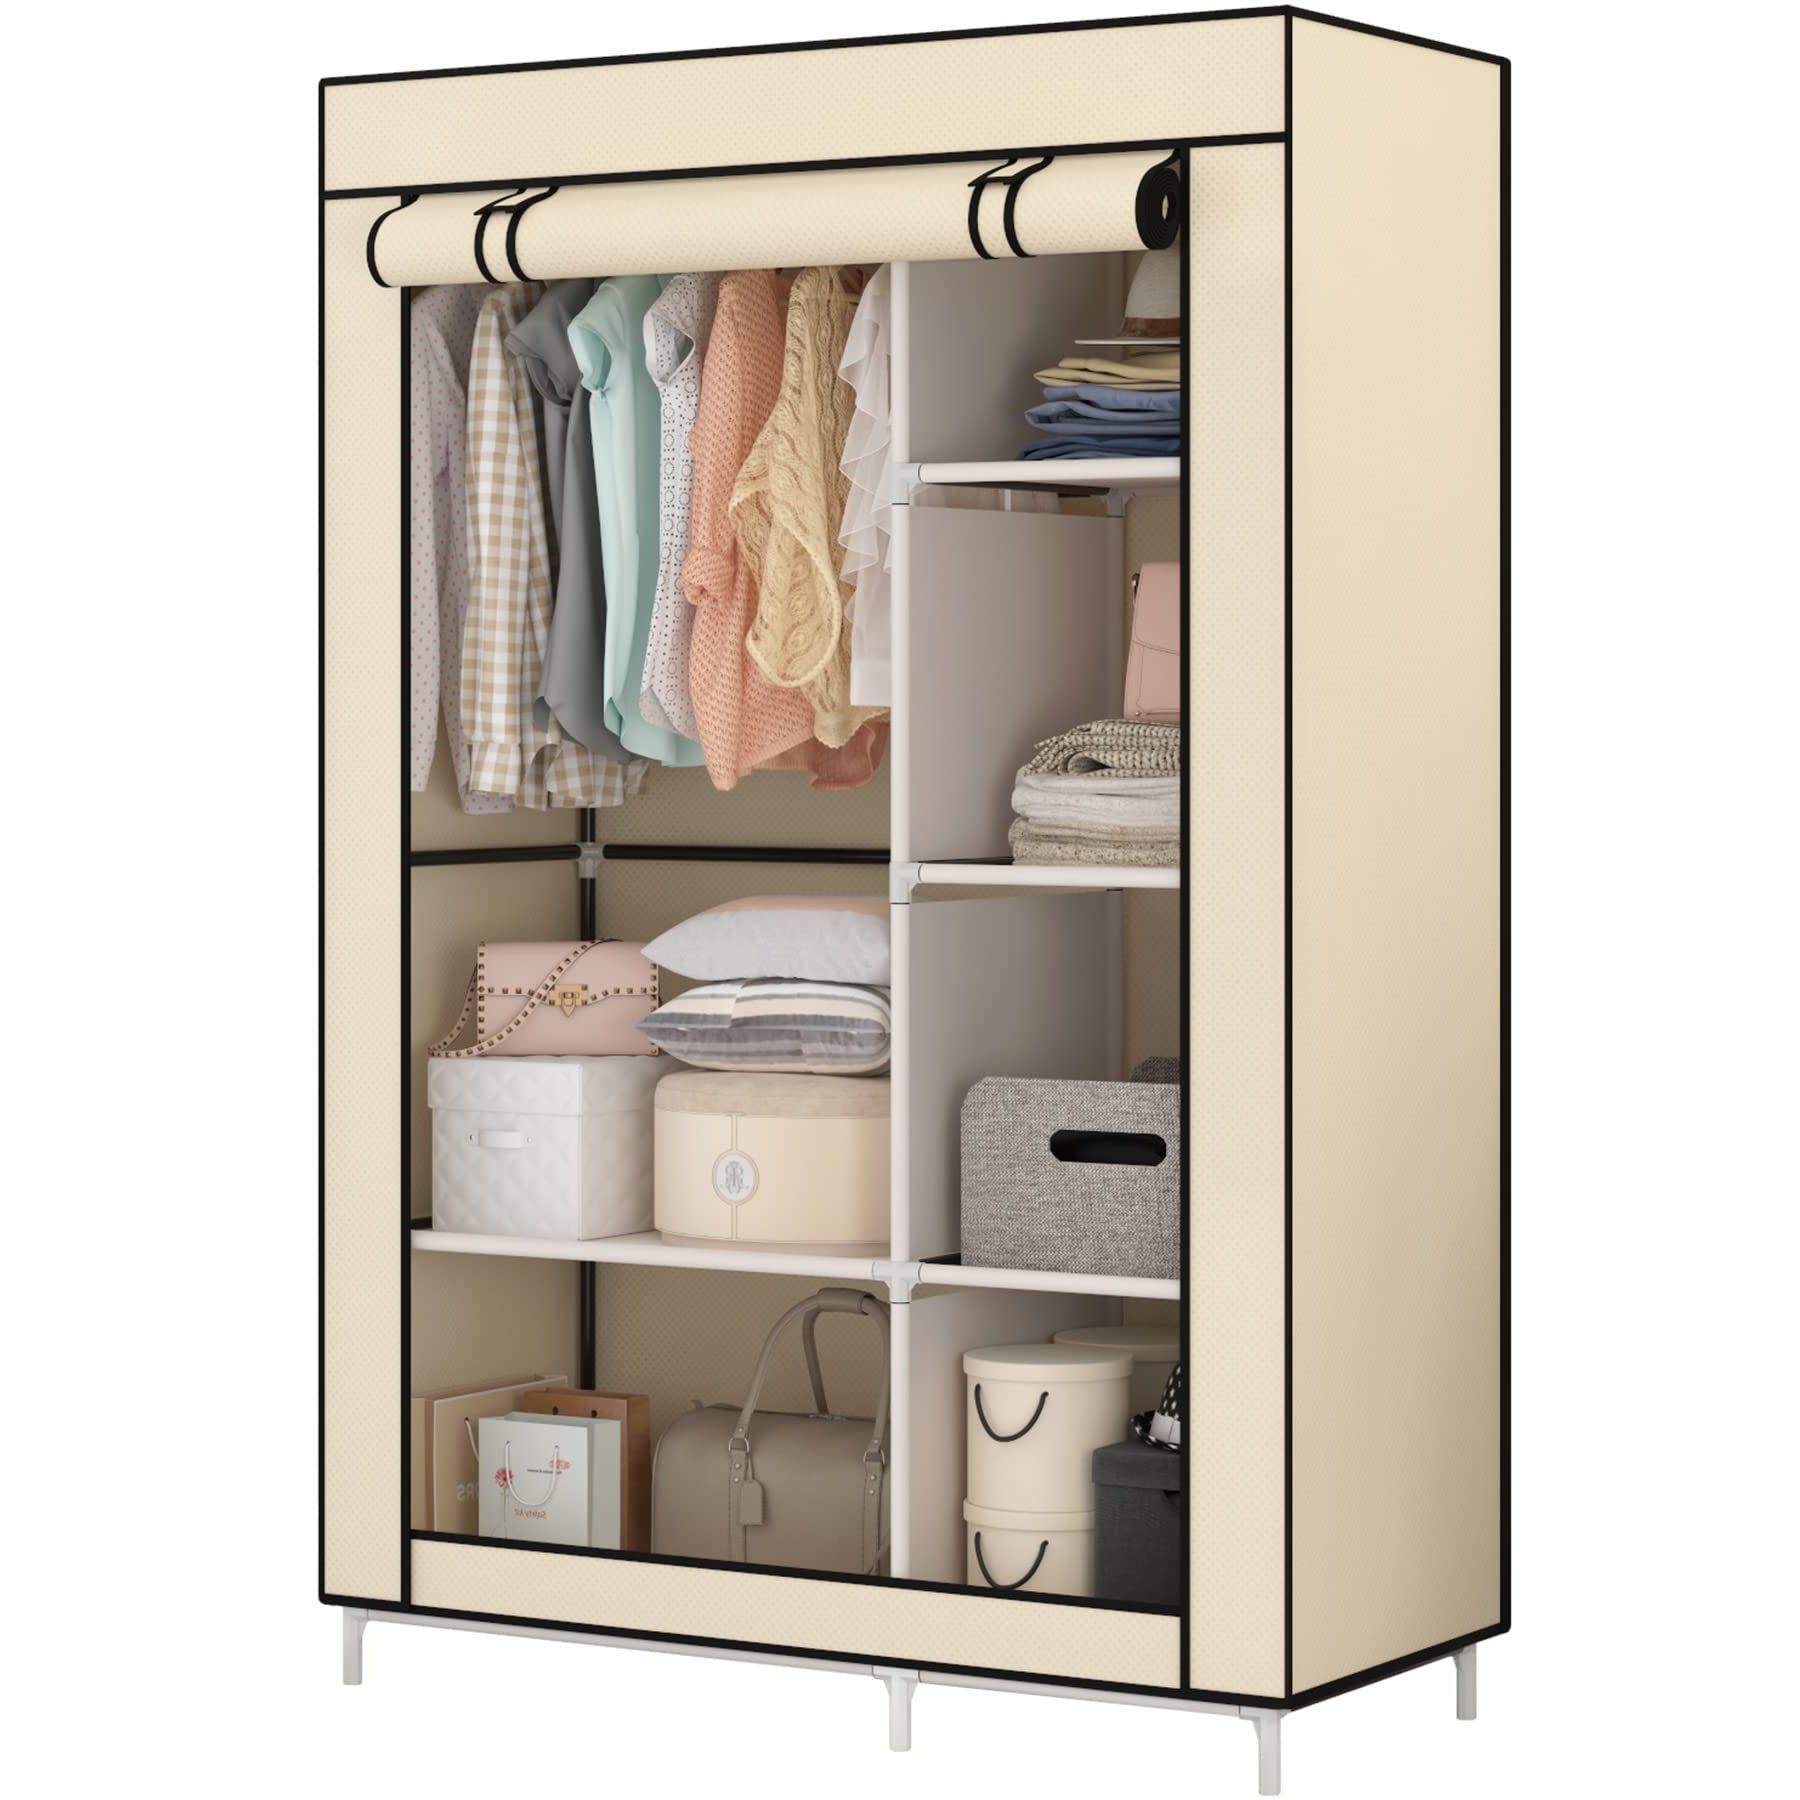 Current 6 Shelf Non Woven Wardrobes Throughout Amazon: Calmootey Closet Storage Organizer,portable Wardrobe With 6  Shelves And Clothes Rod,non Woven Fabric Cover With 4 Side Pockets,beige :  Home & Kitchen (View 4 of 10)